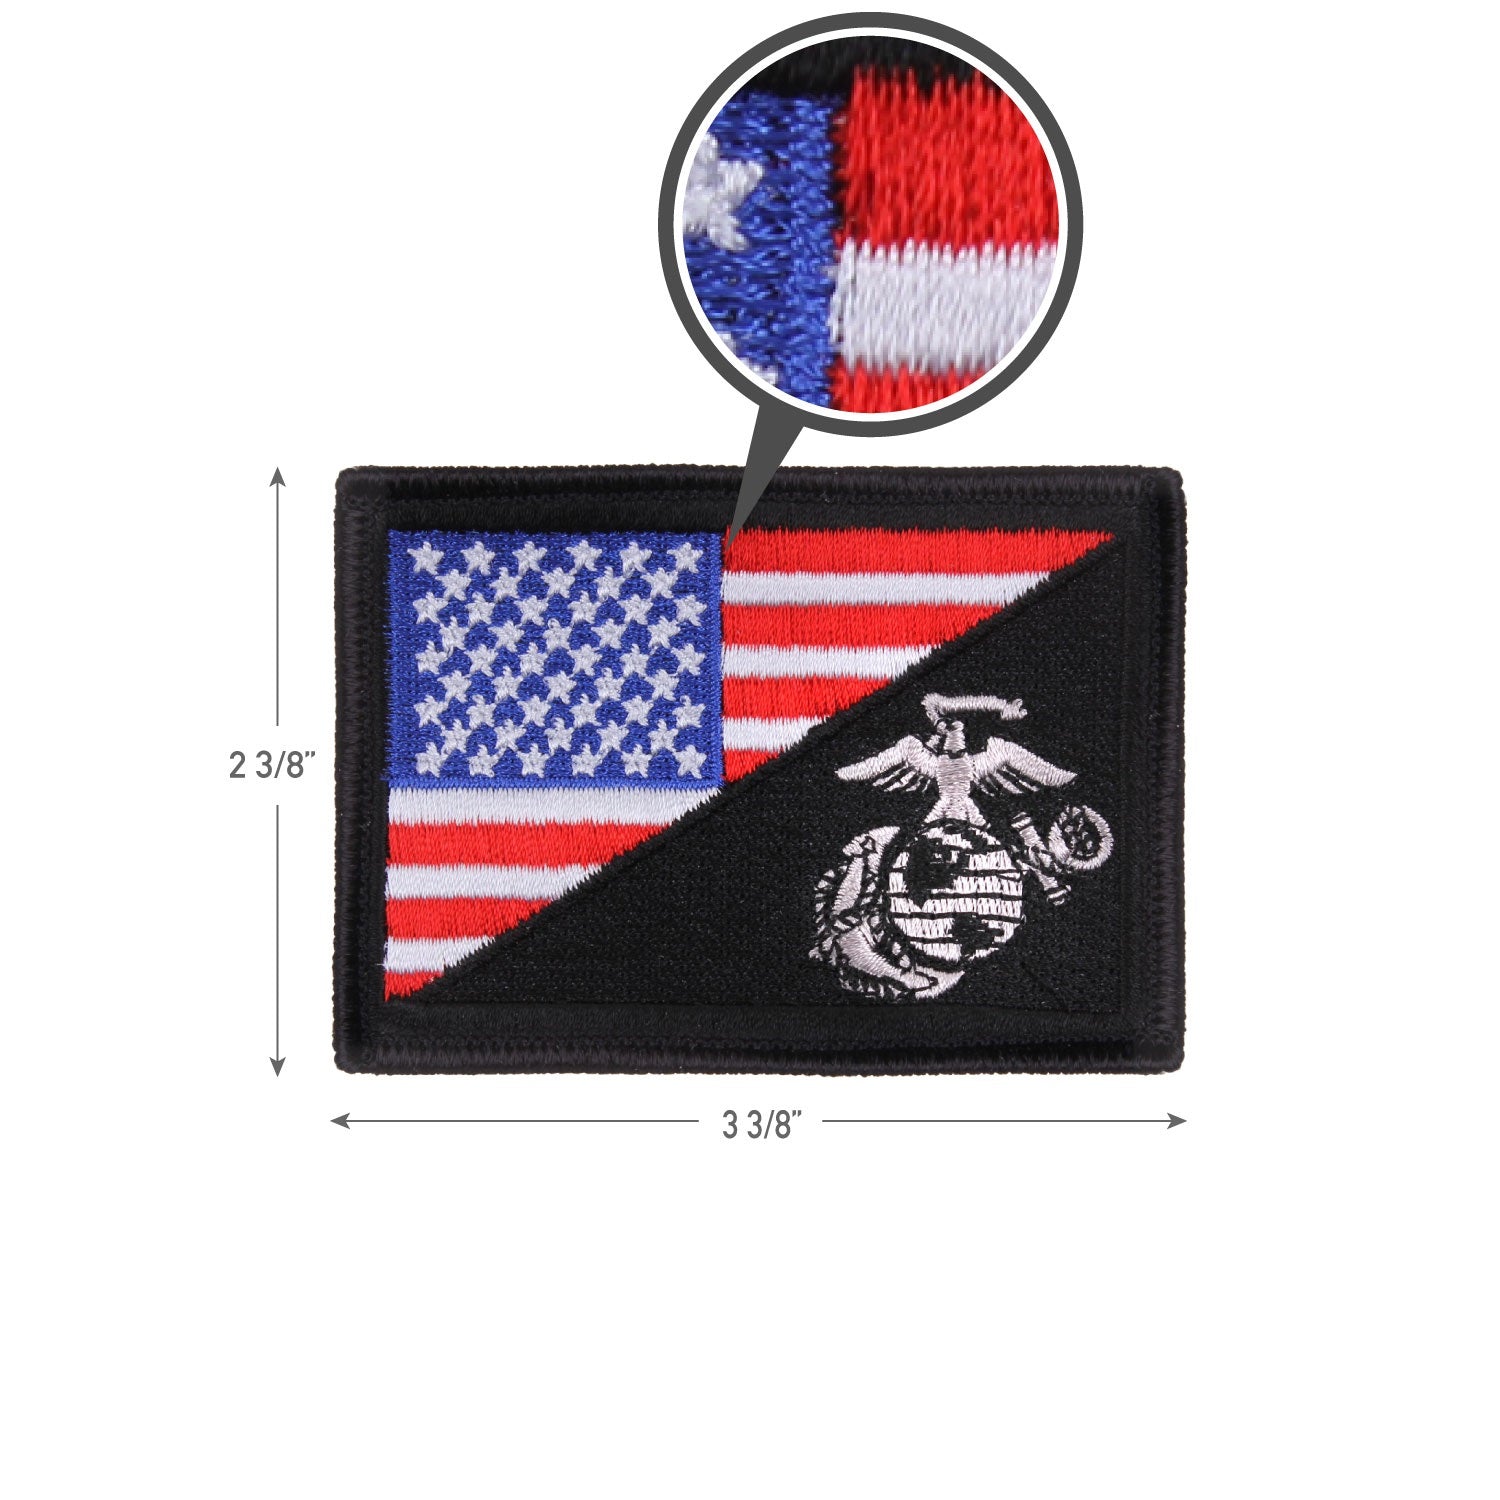 Rothco US Flag / USMC Globe and Anchor Morale Patch